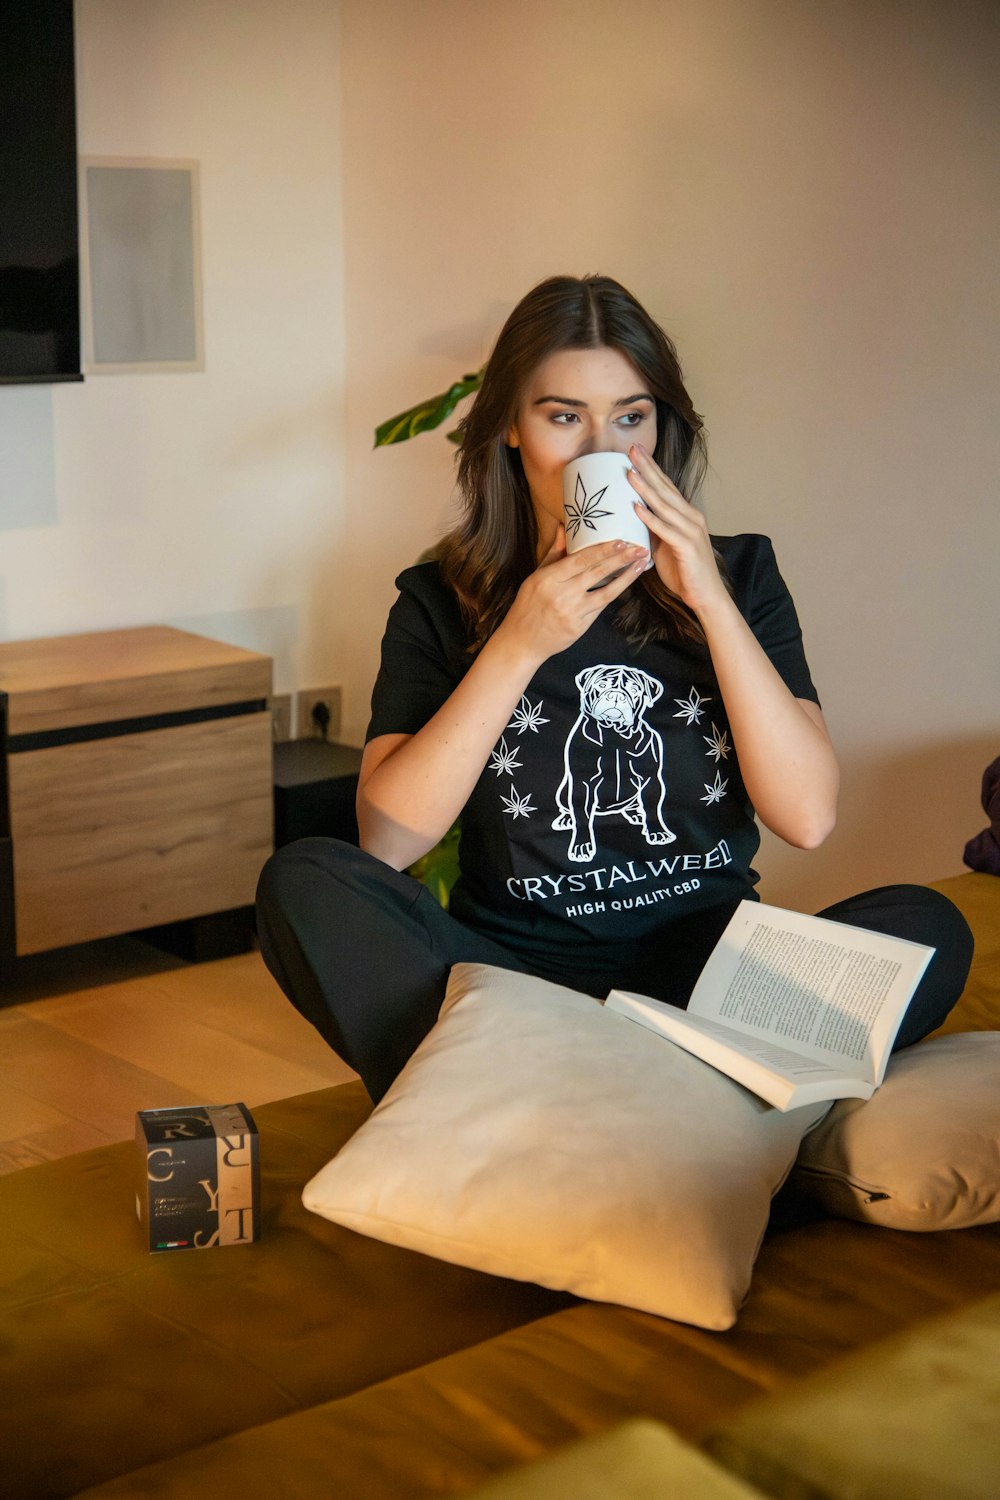 a woman sitting on a bed drinking from a mug